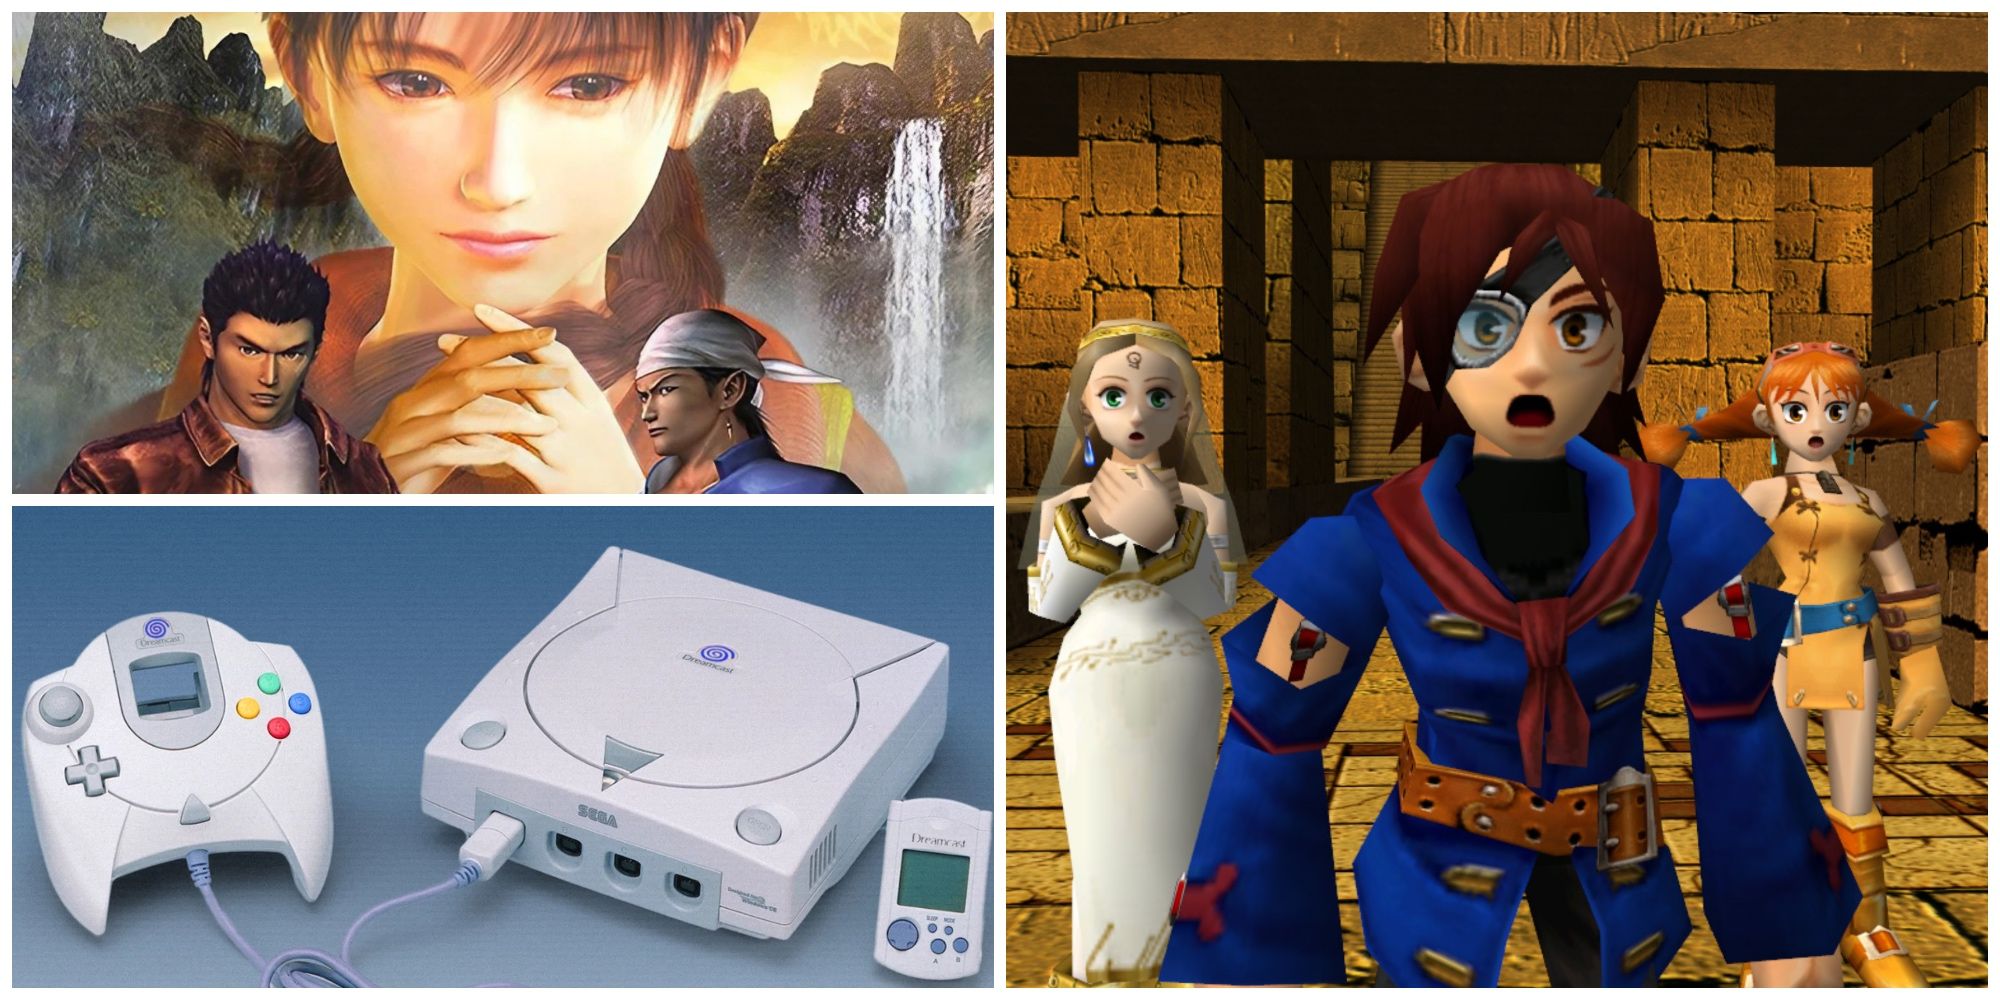 The Dreamcast, Skies of Arcadia and Shenmue 2